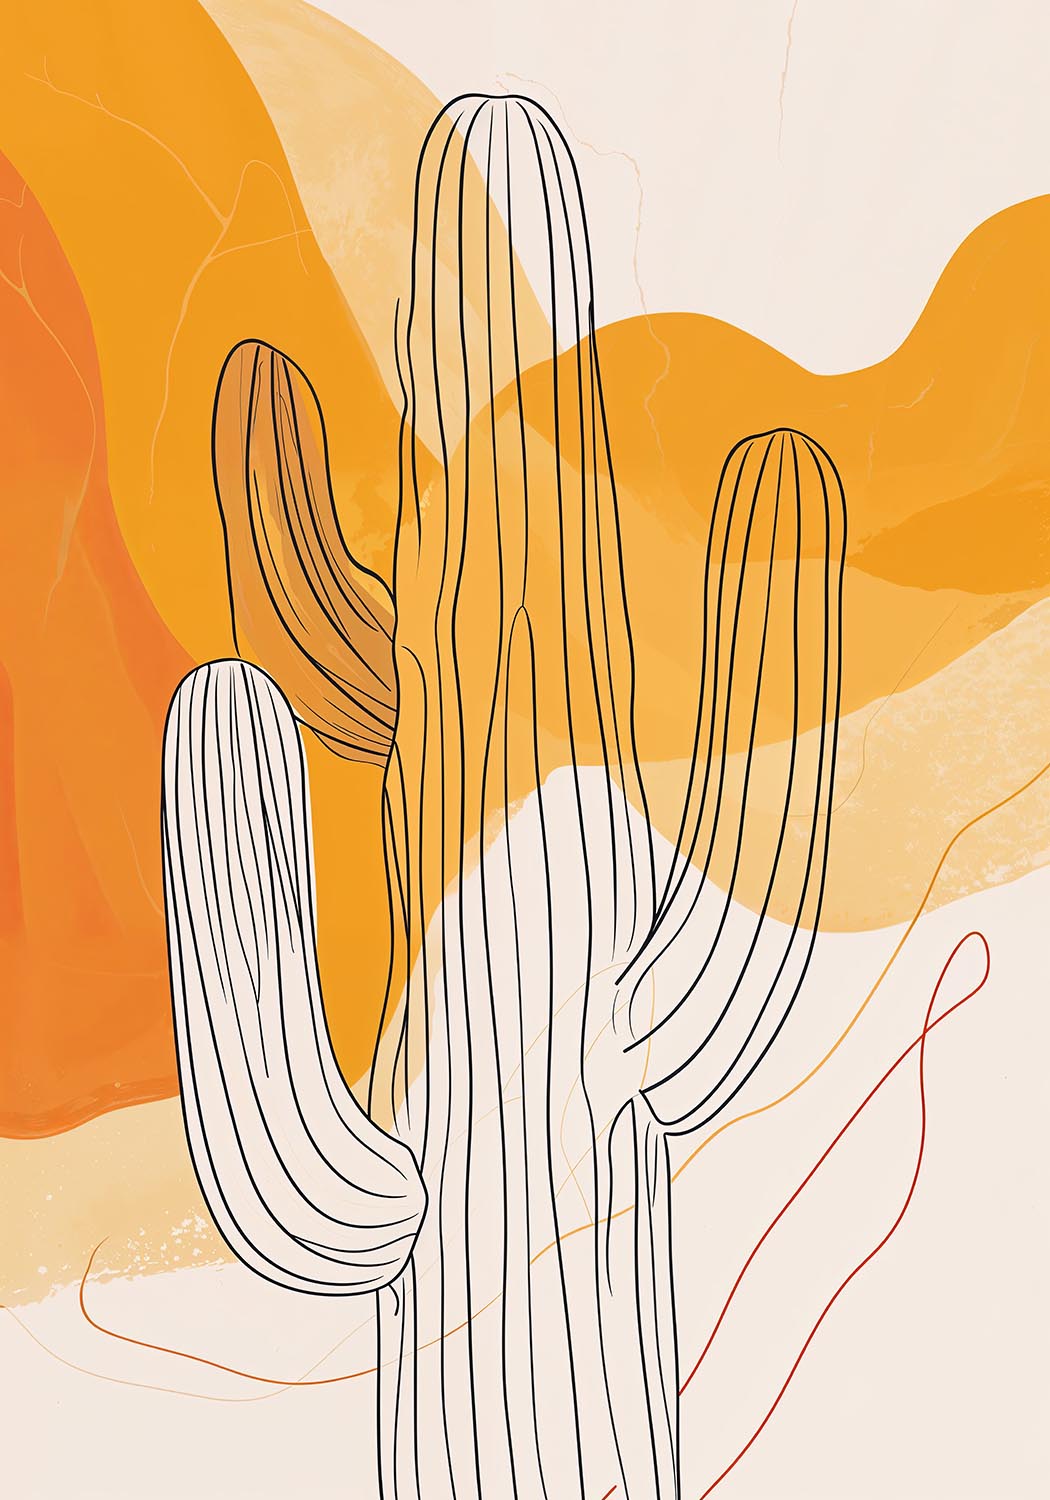 An abstract art poster featuring stylized line art of cacti set against a backdrop of warm amber and soft cream colors with subtle texture details.